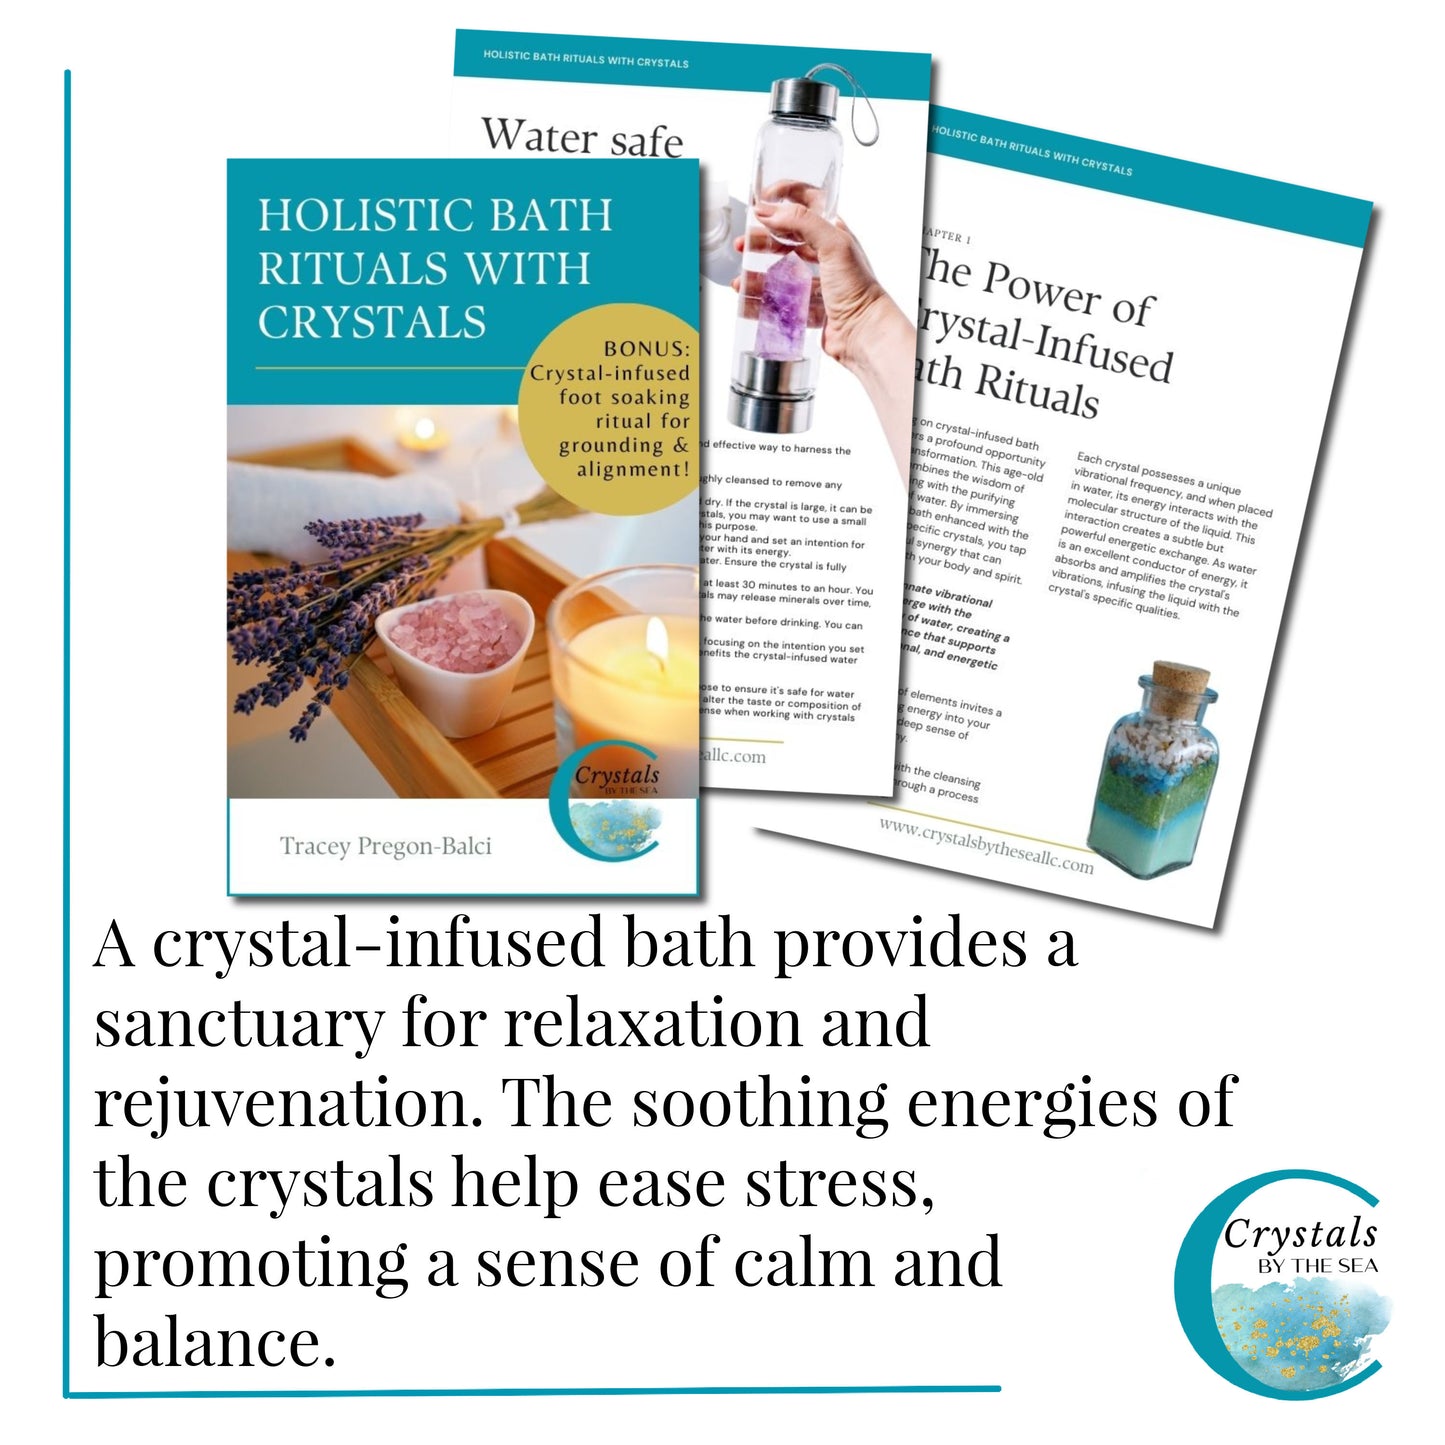 Crystal-Infused Holistic Bath Rituals Paperback Book by Tracey Pregon-Balci